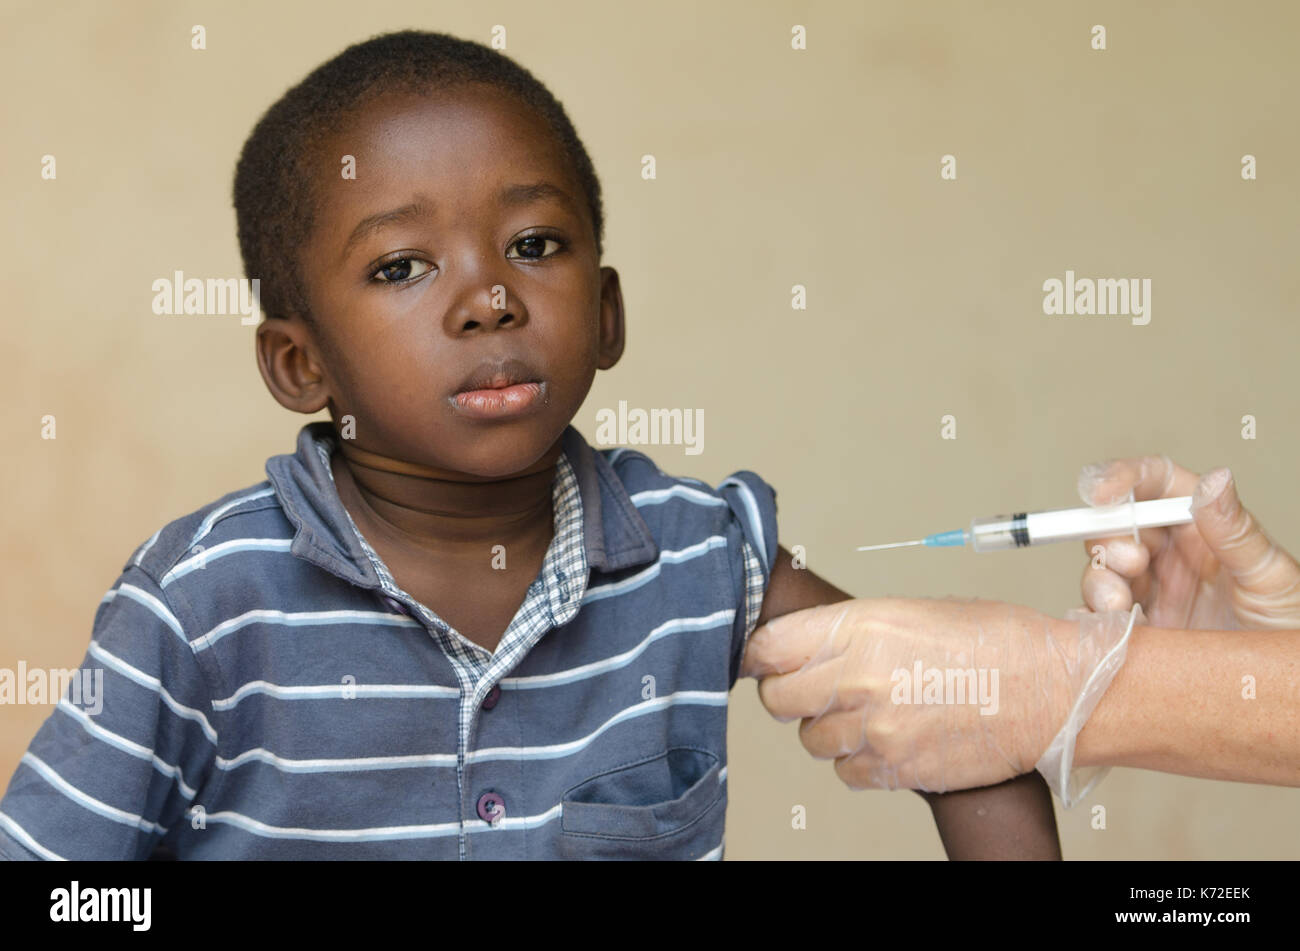 White doctor giving black African boy a needle injection as a vaccination Stock Photo